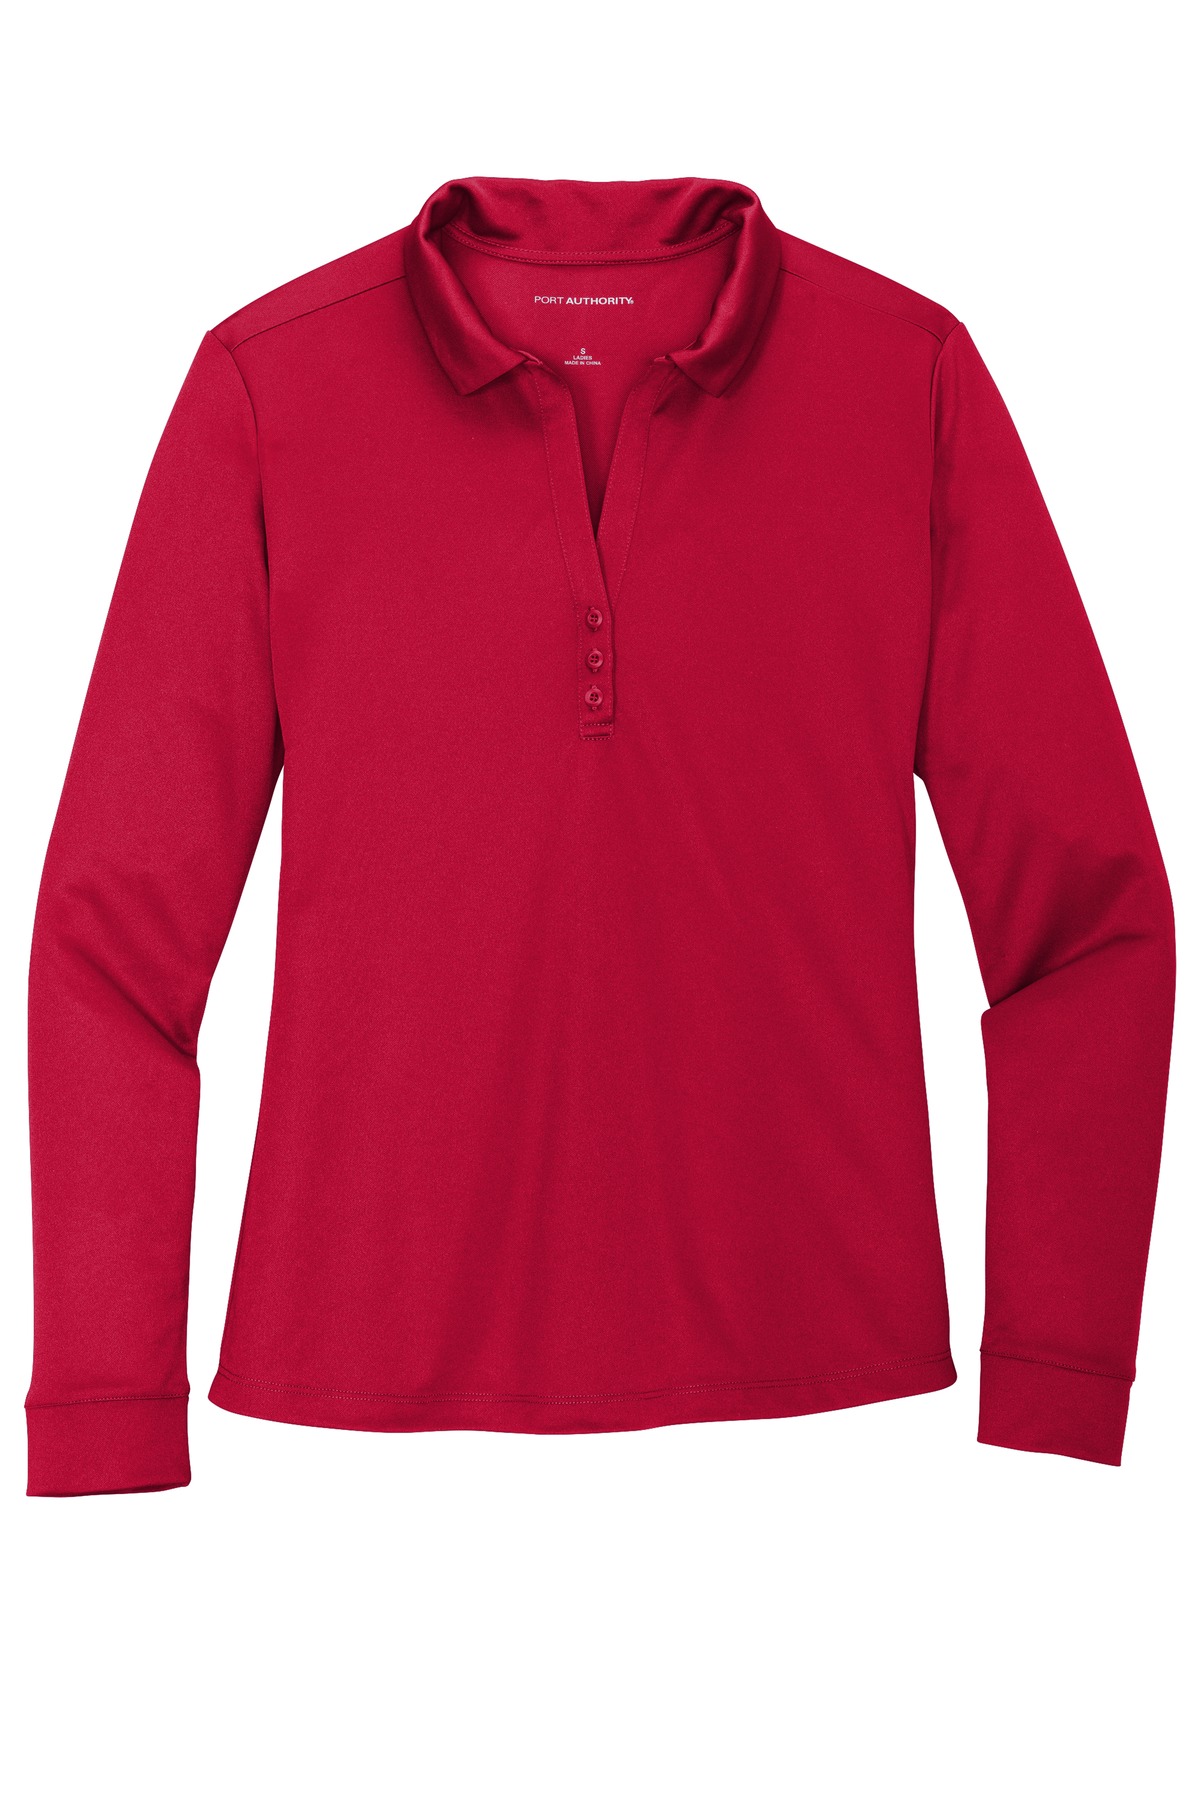 Port Authority Adult Female Women Y-neck Plain Long Sleeves Polo Red Medium - image 3 of 4